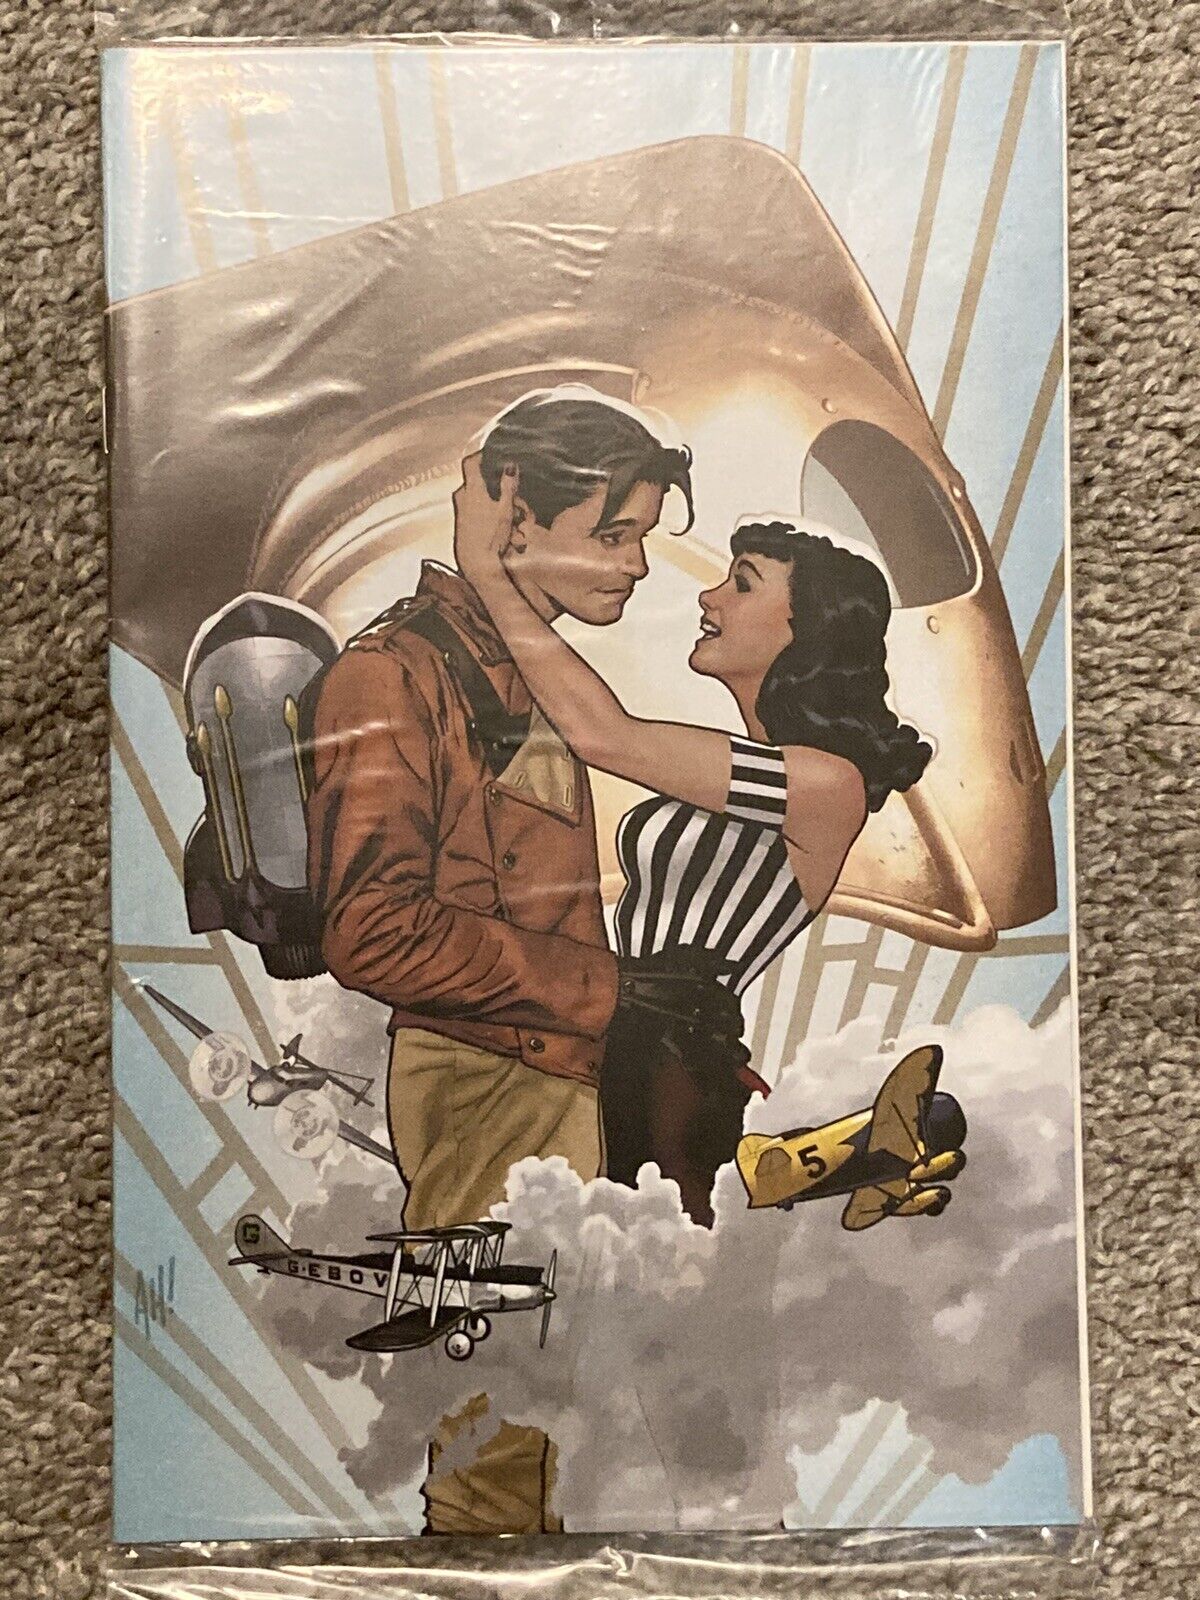 The Rocketeer #1 IDW Online Exclusive Variant Cover